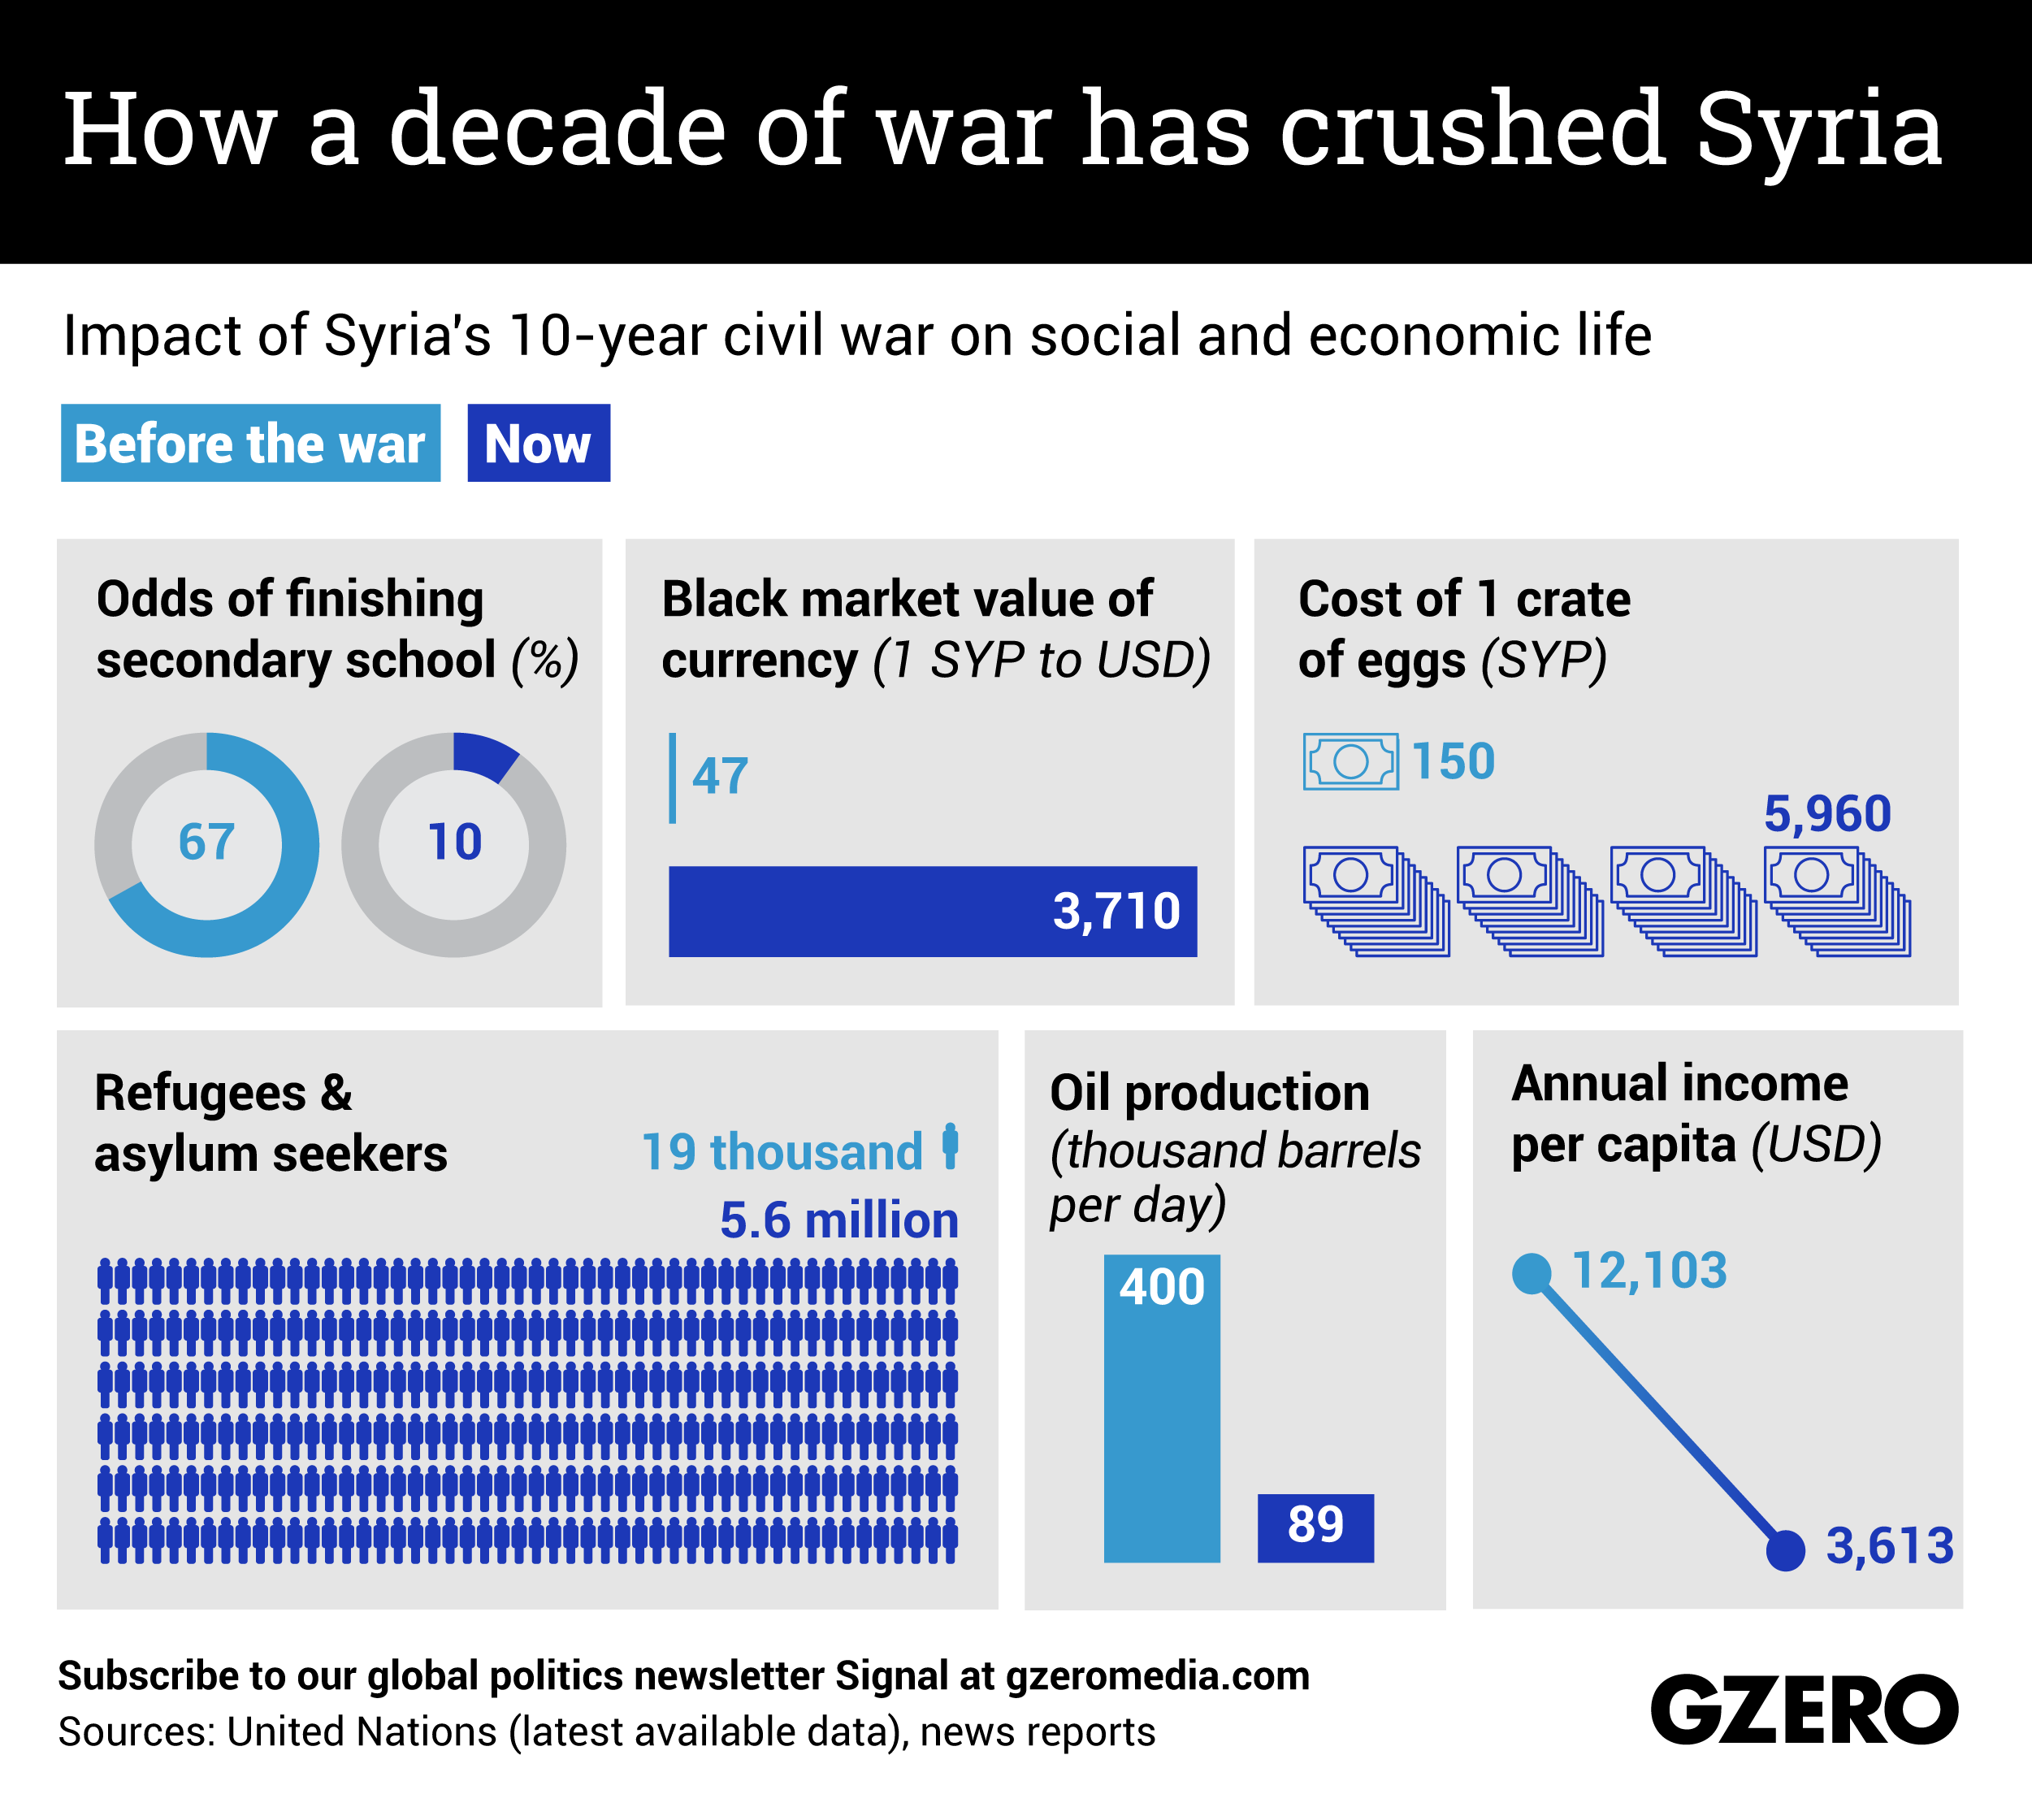 The Graphic Truth: How a decade of war has crushed Syria